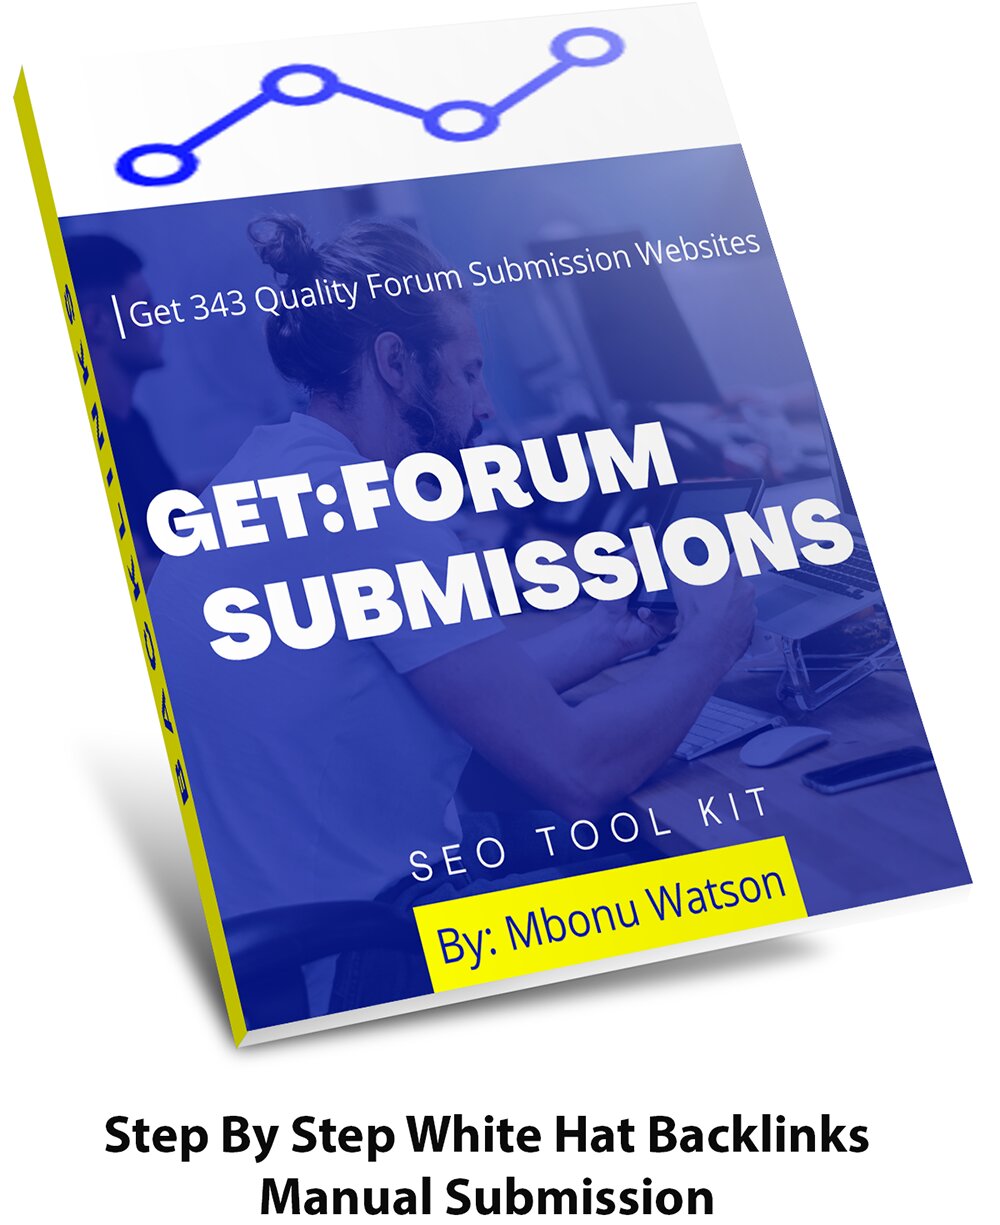 List Of Forum Submissions Websites, worldsocio.jpg